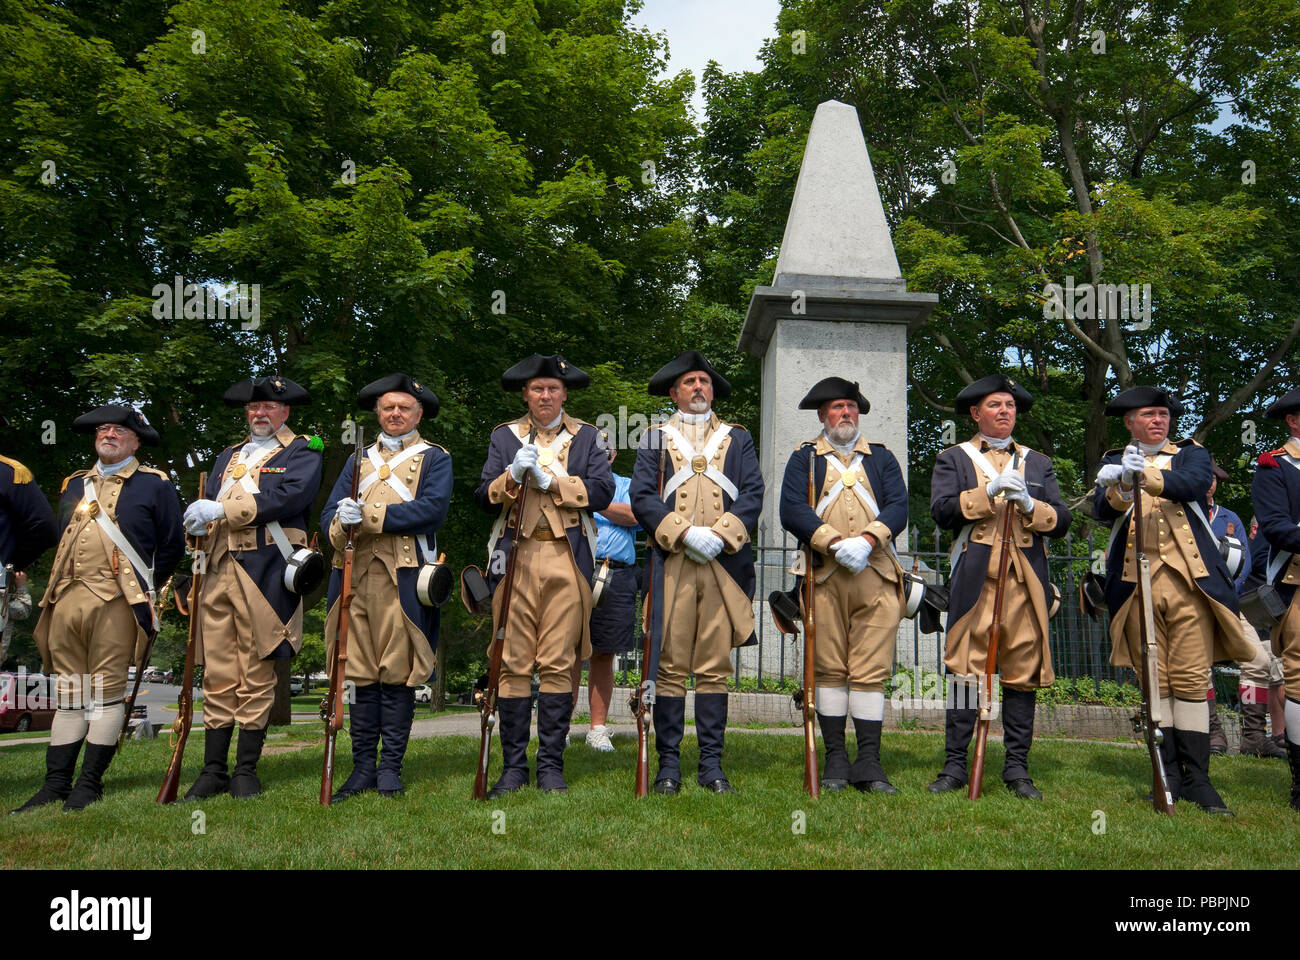 Men in military uniform to reenact the American War of Independence, Lexington Battle Green, Lexington, Middlesex County, Massachusetts, USA Stock Photo